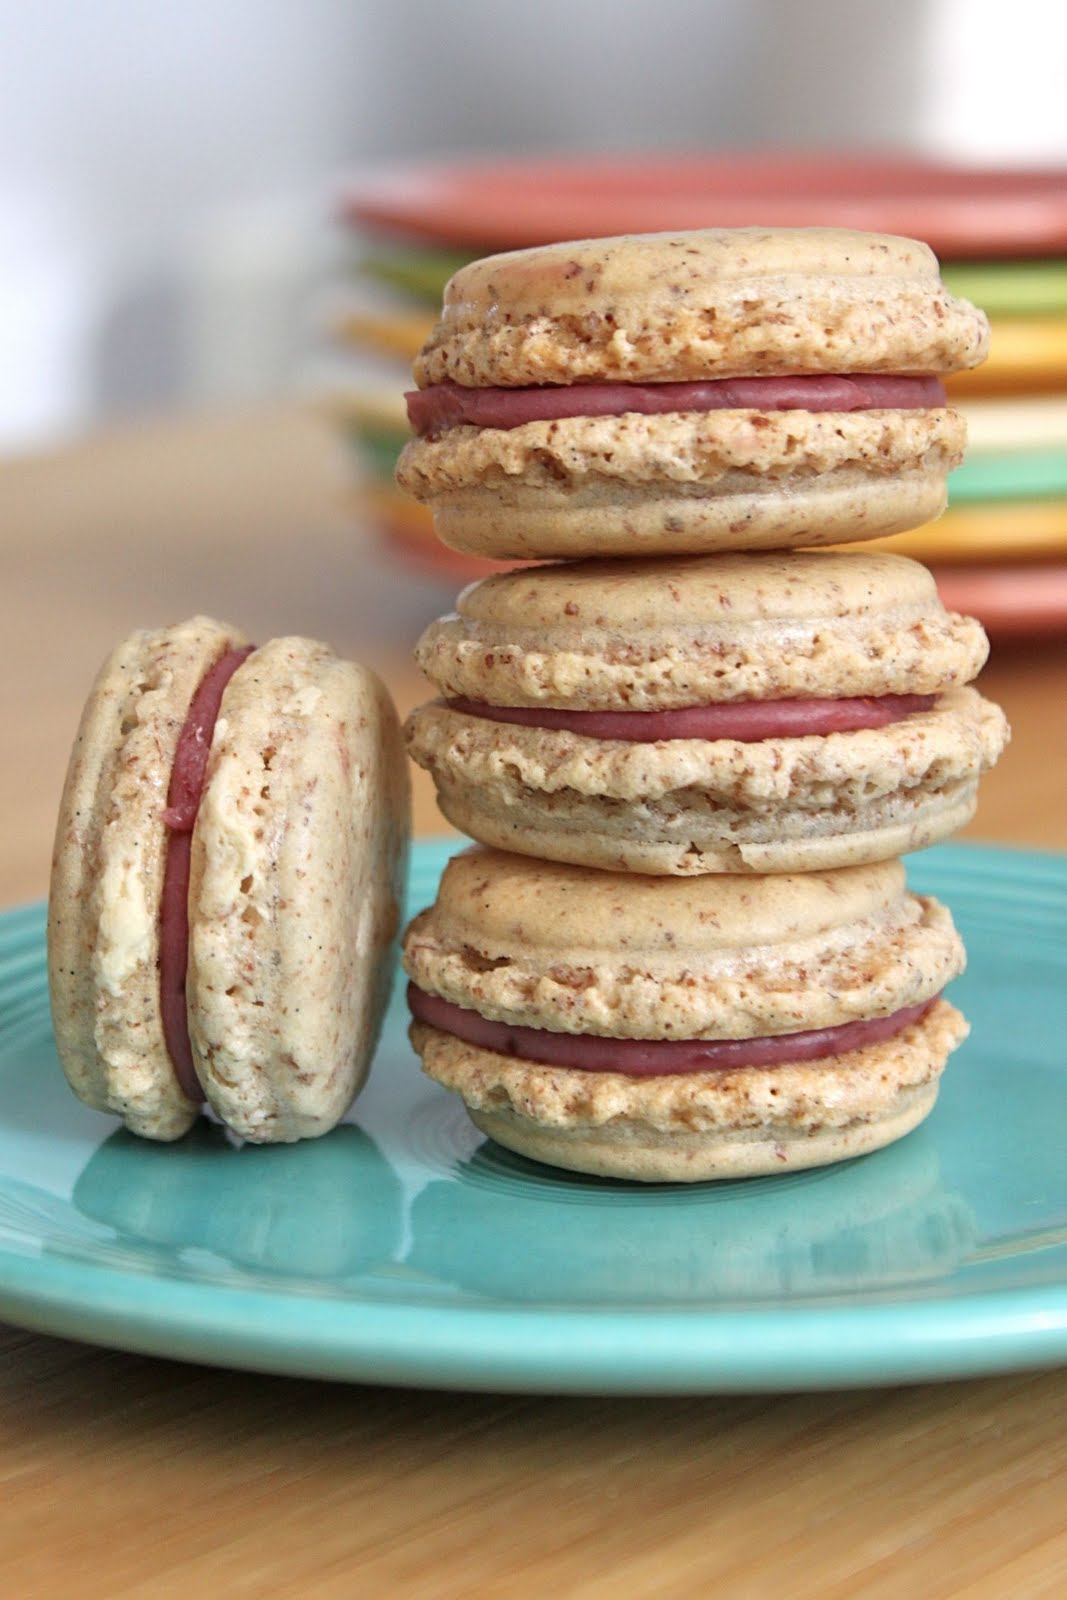 Baked Perfection: French Macarons